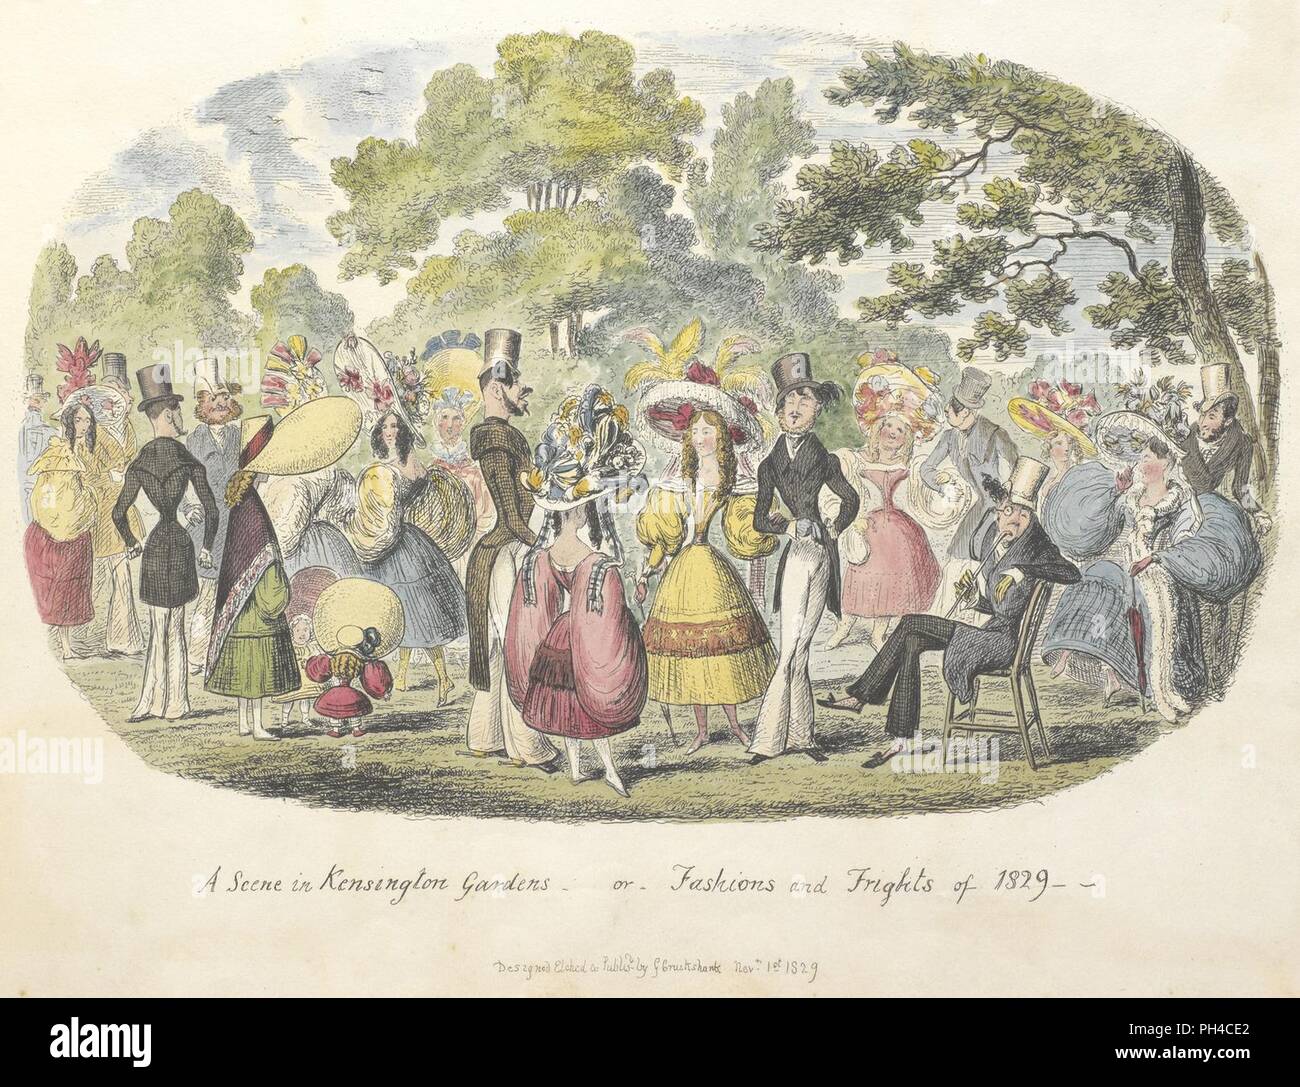 Scraps and sketches, etc. - ''A scene in Kensington Gardens, or fashion and frights of 1829'. An amusing sketch showing people dressed up, in the park.' . Stock Photo